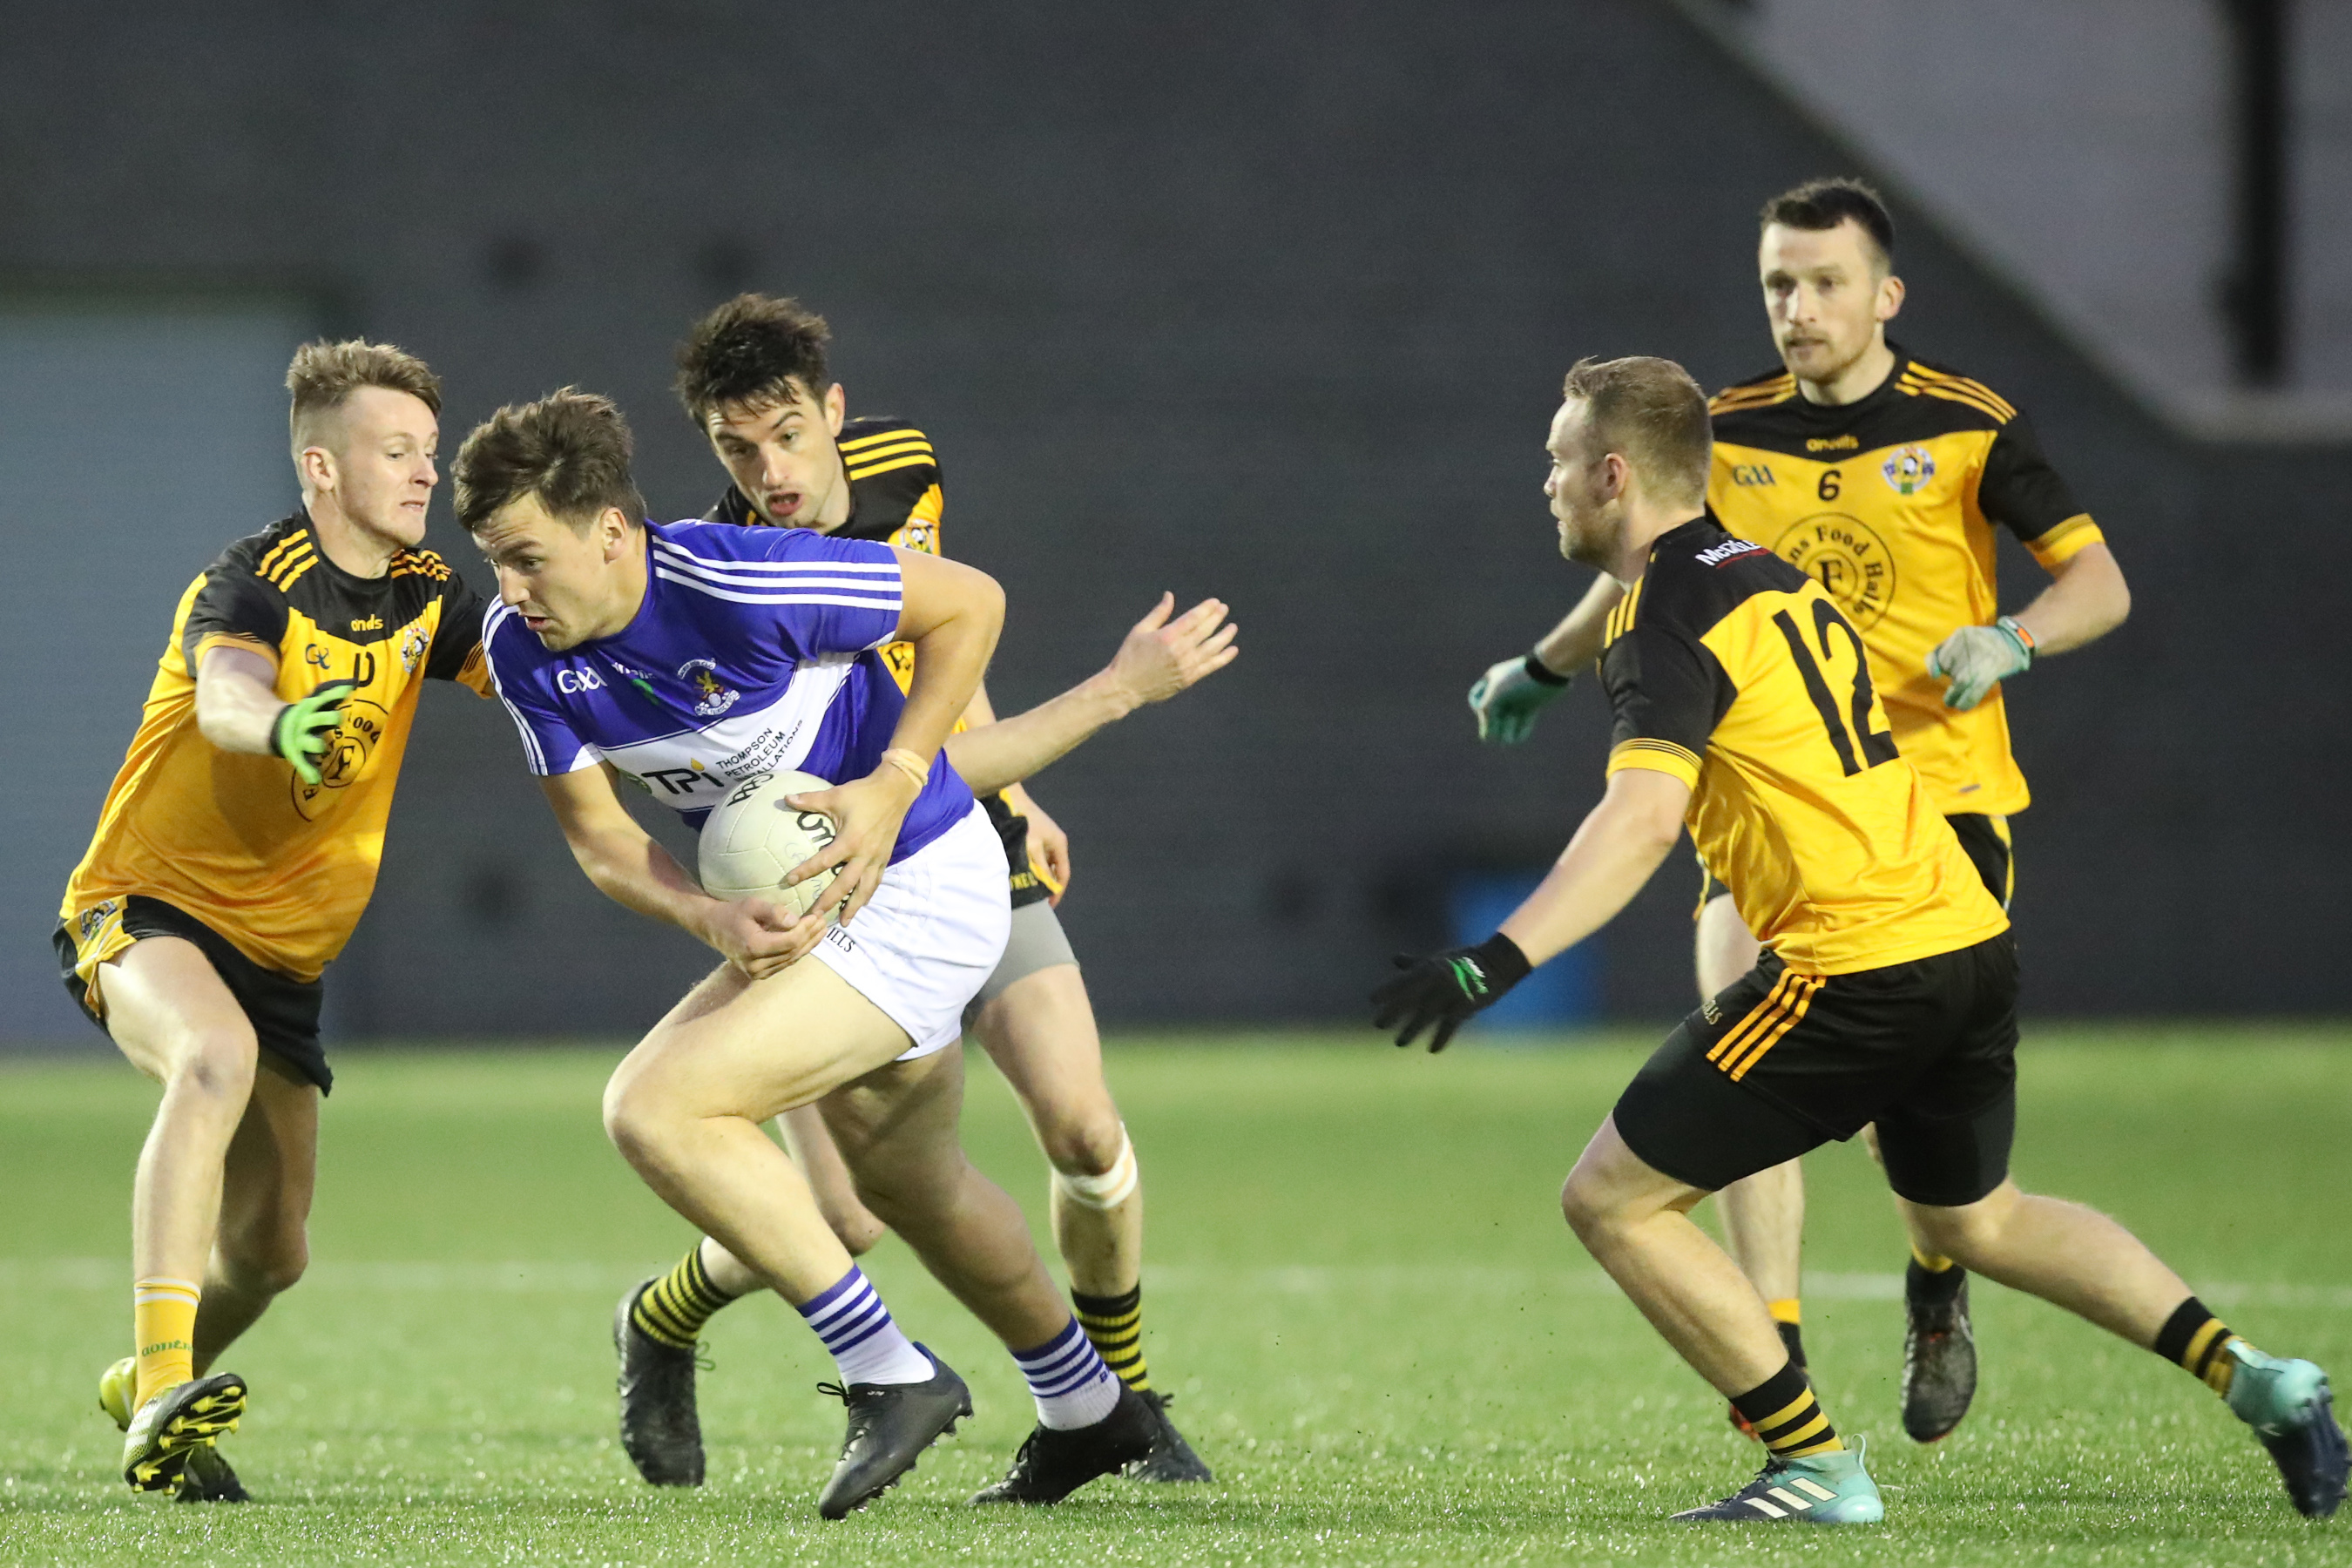 St John’s midfielder Domhnall Nugent comes under pressure from Portglenone’s Niall McKeever and Ronan Kelly during last night’s Antrim SFC replay at Coláiste Feirste 